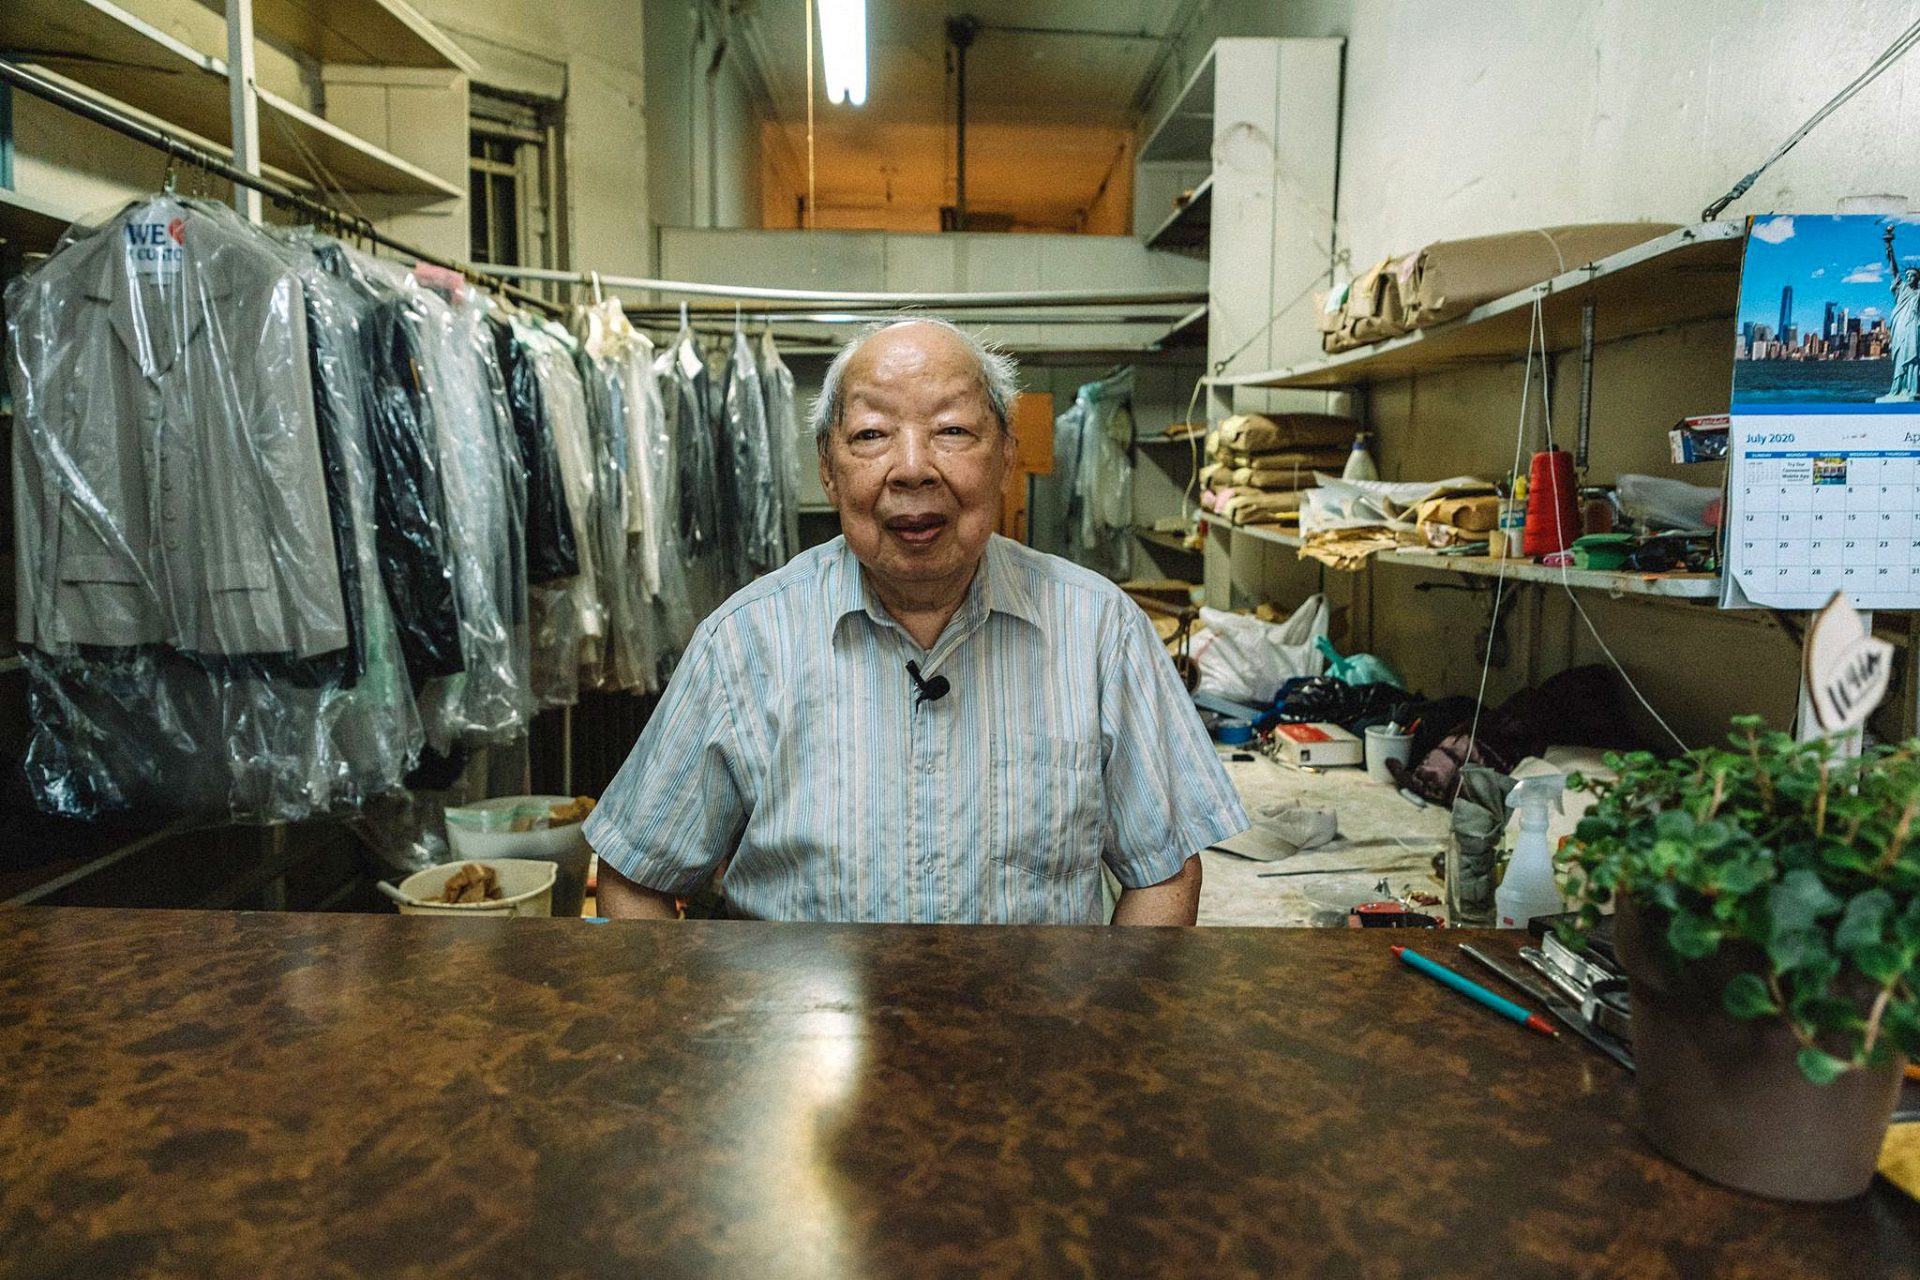 ‘A unhappy and truthful historical previous’: One of NYC’s final Chinese hand laundries closes